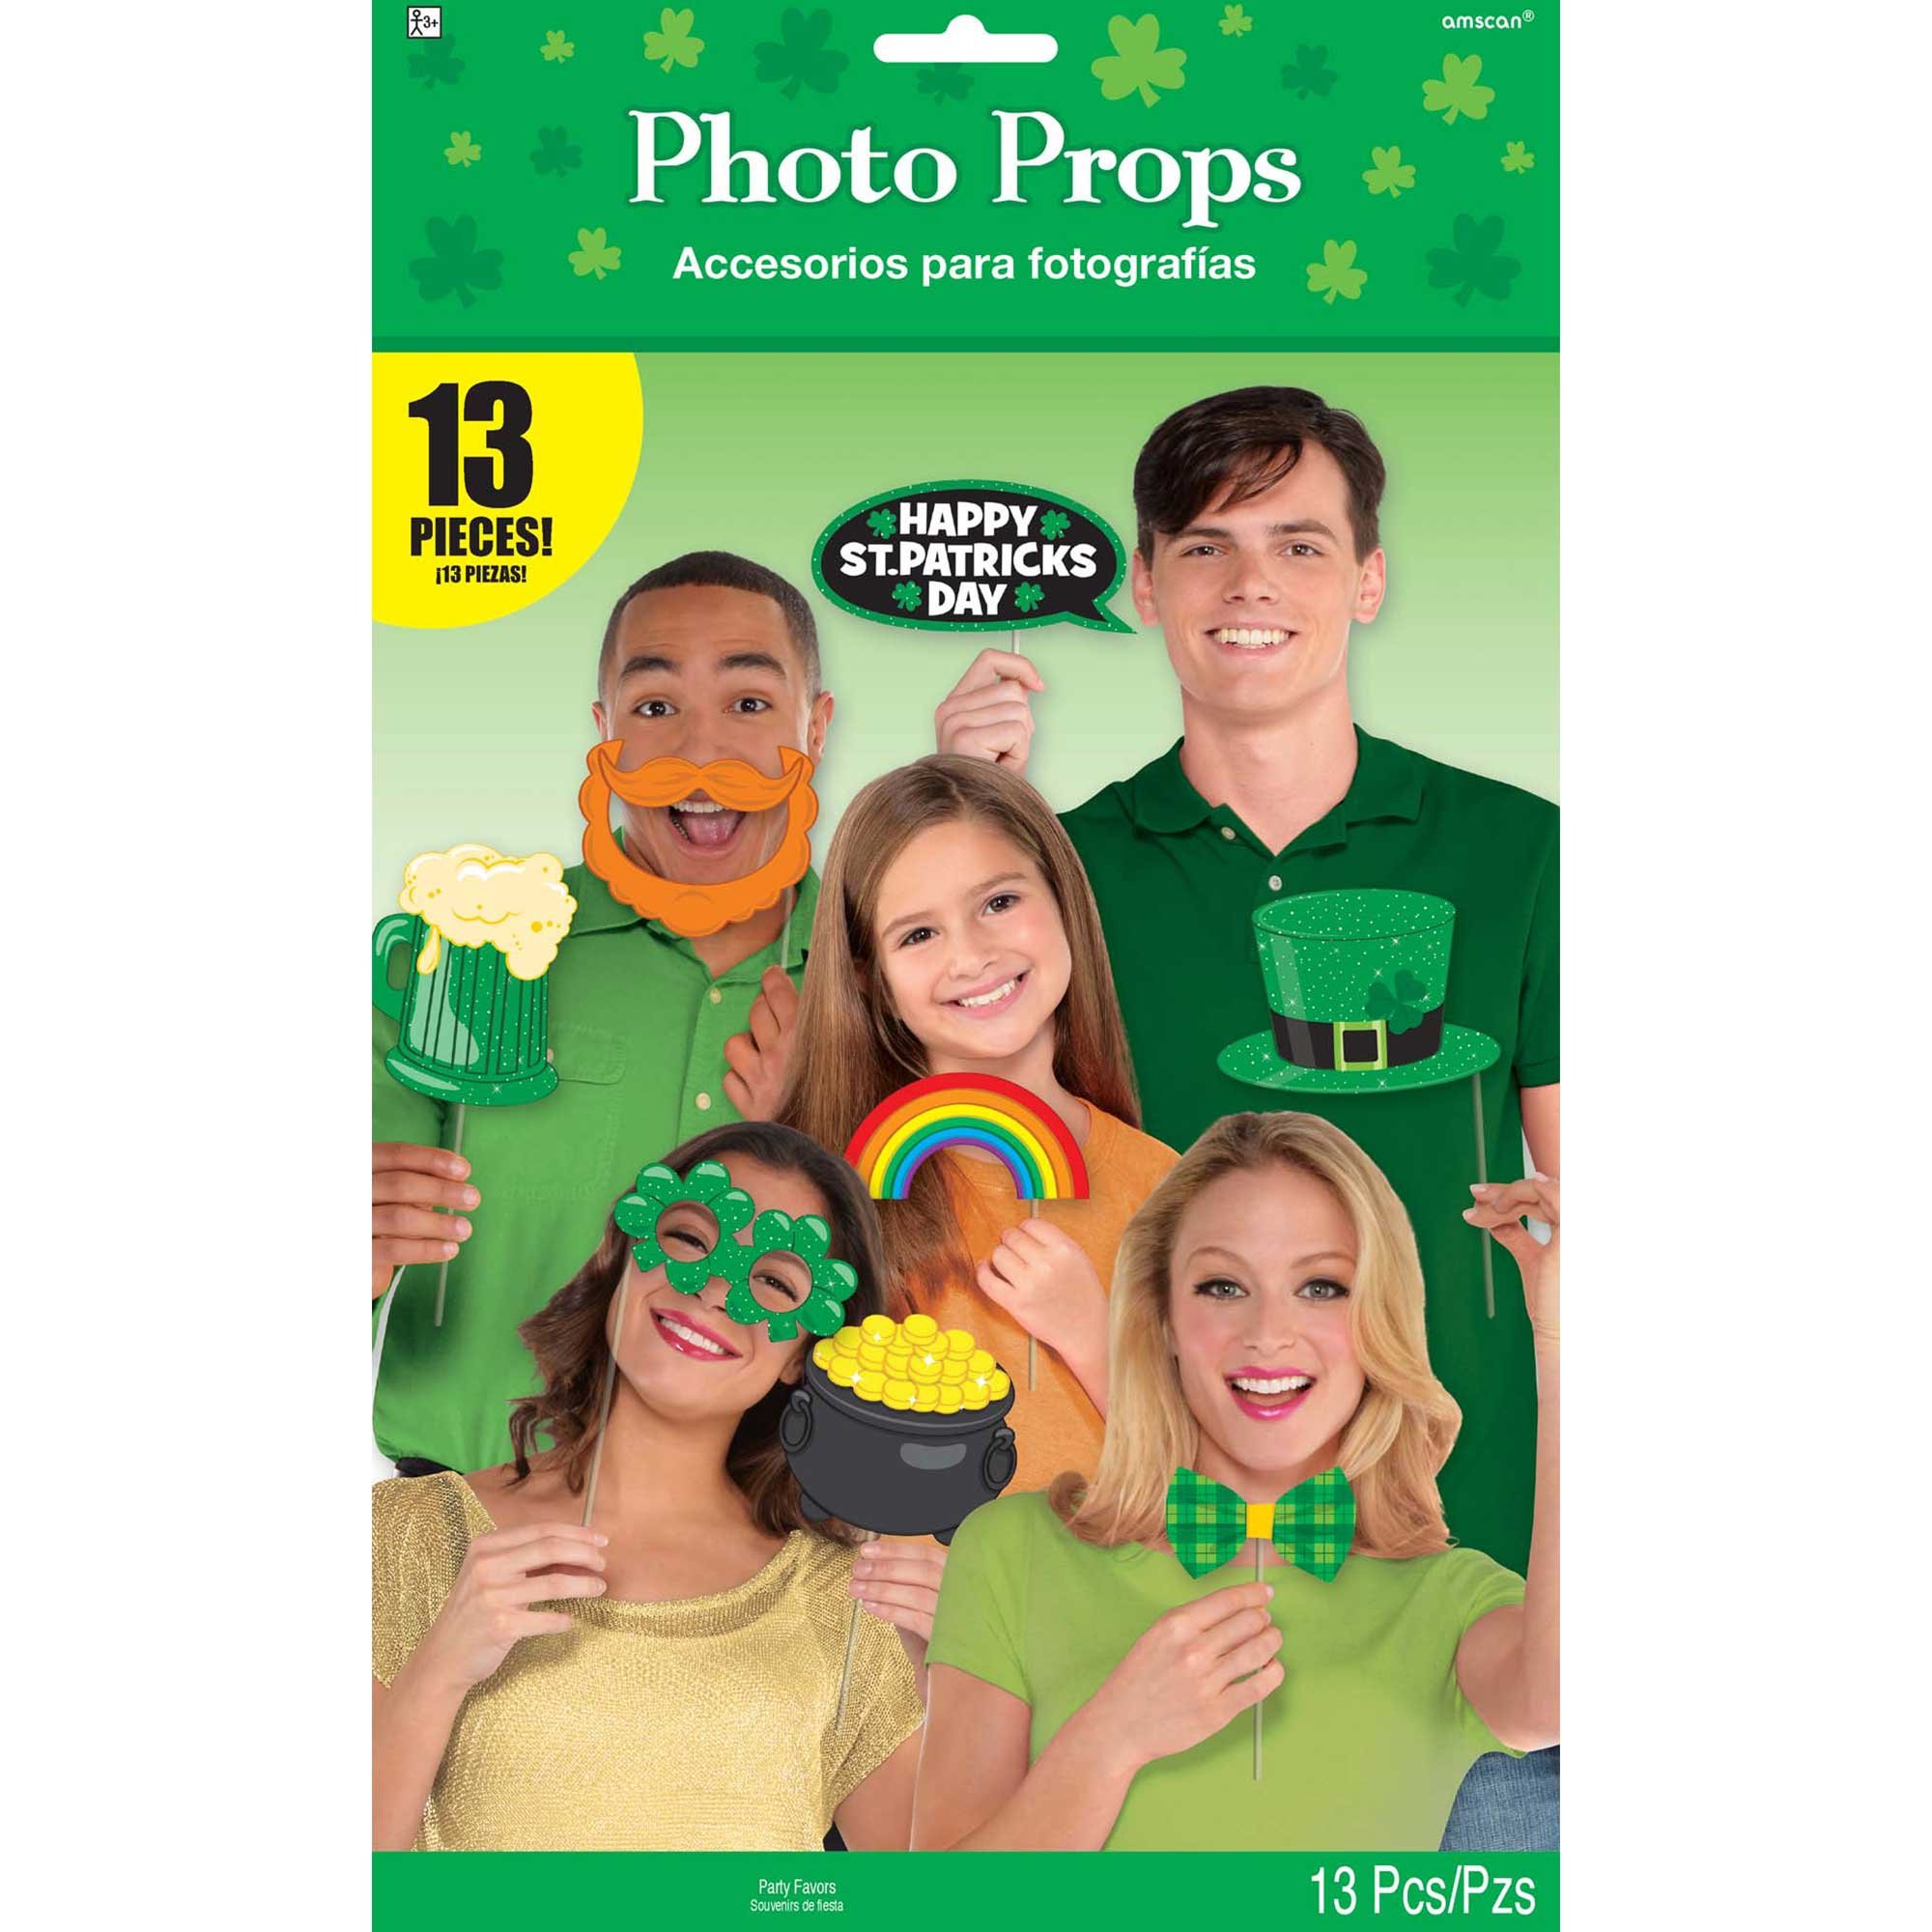 SELFIE PHOTO BOOTH PROPS - ST PATRICK'S DAY PACK OF 13